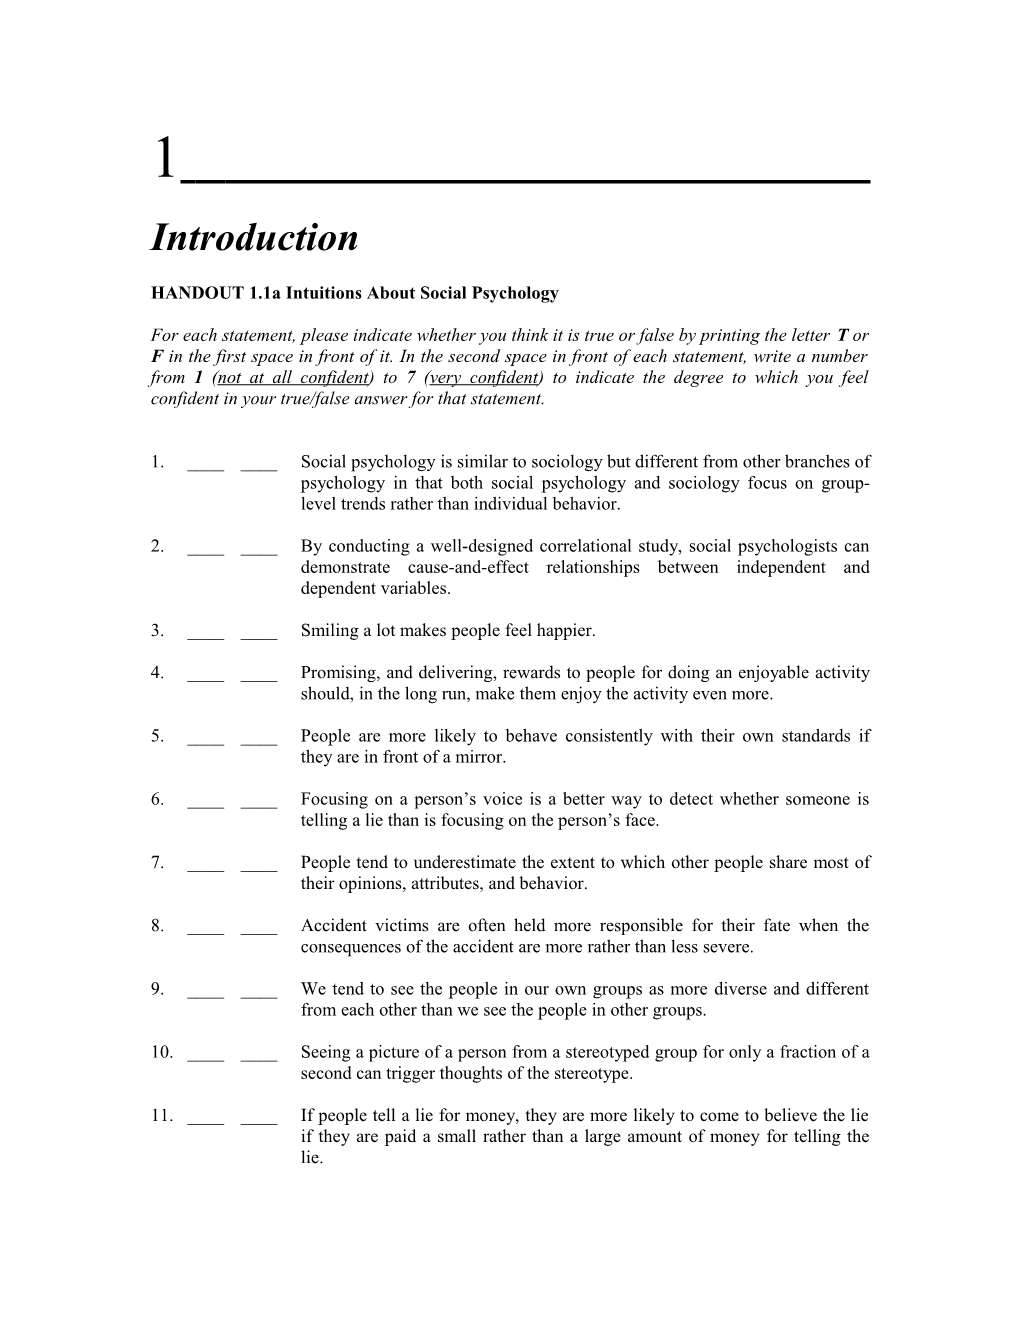 HANDOUT 1.1A Intuitions About Social Psychology